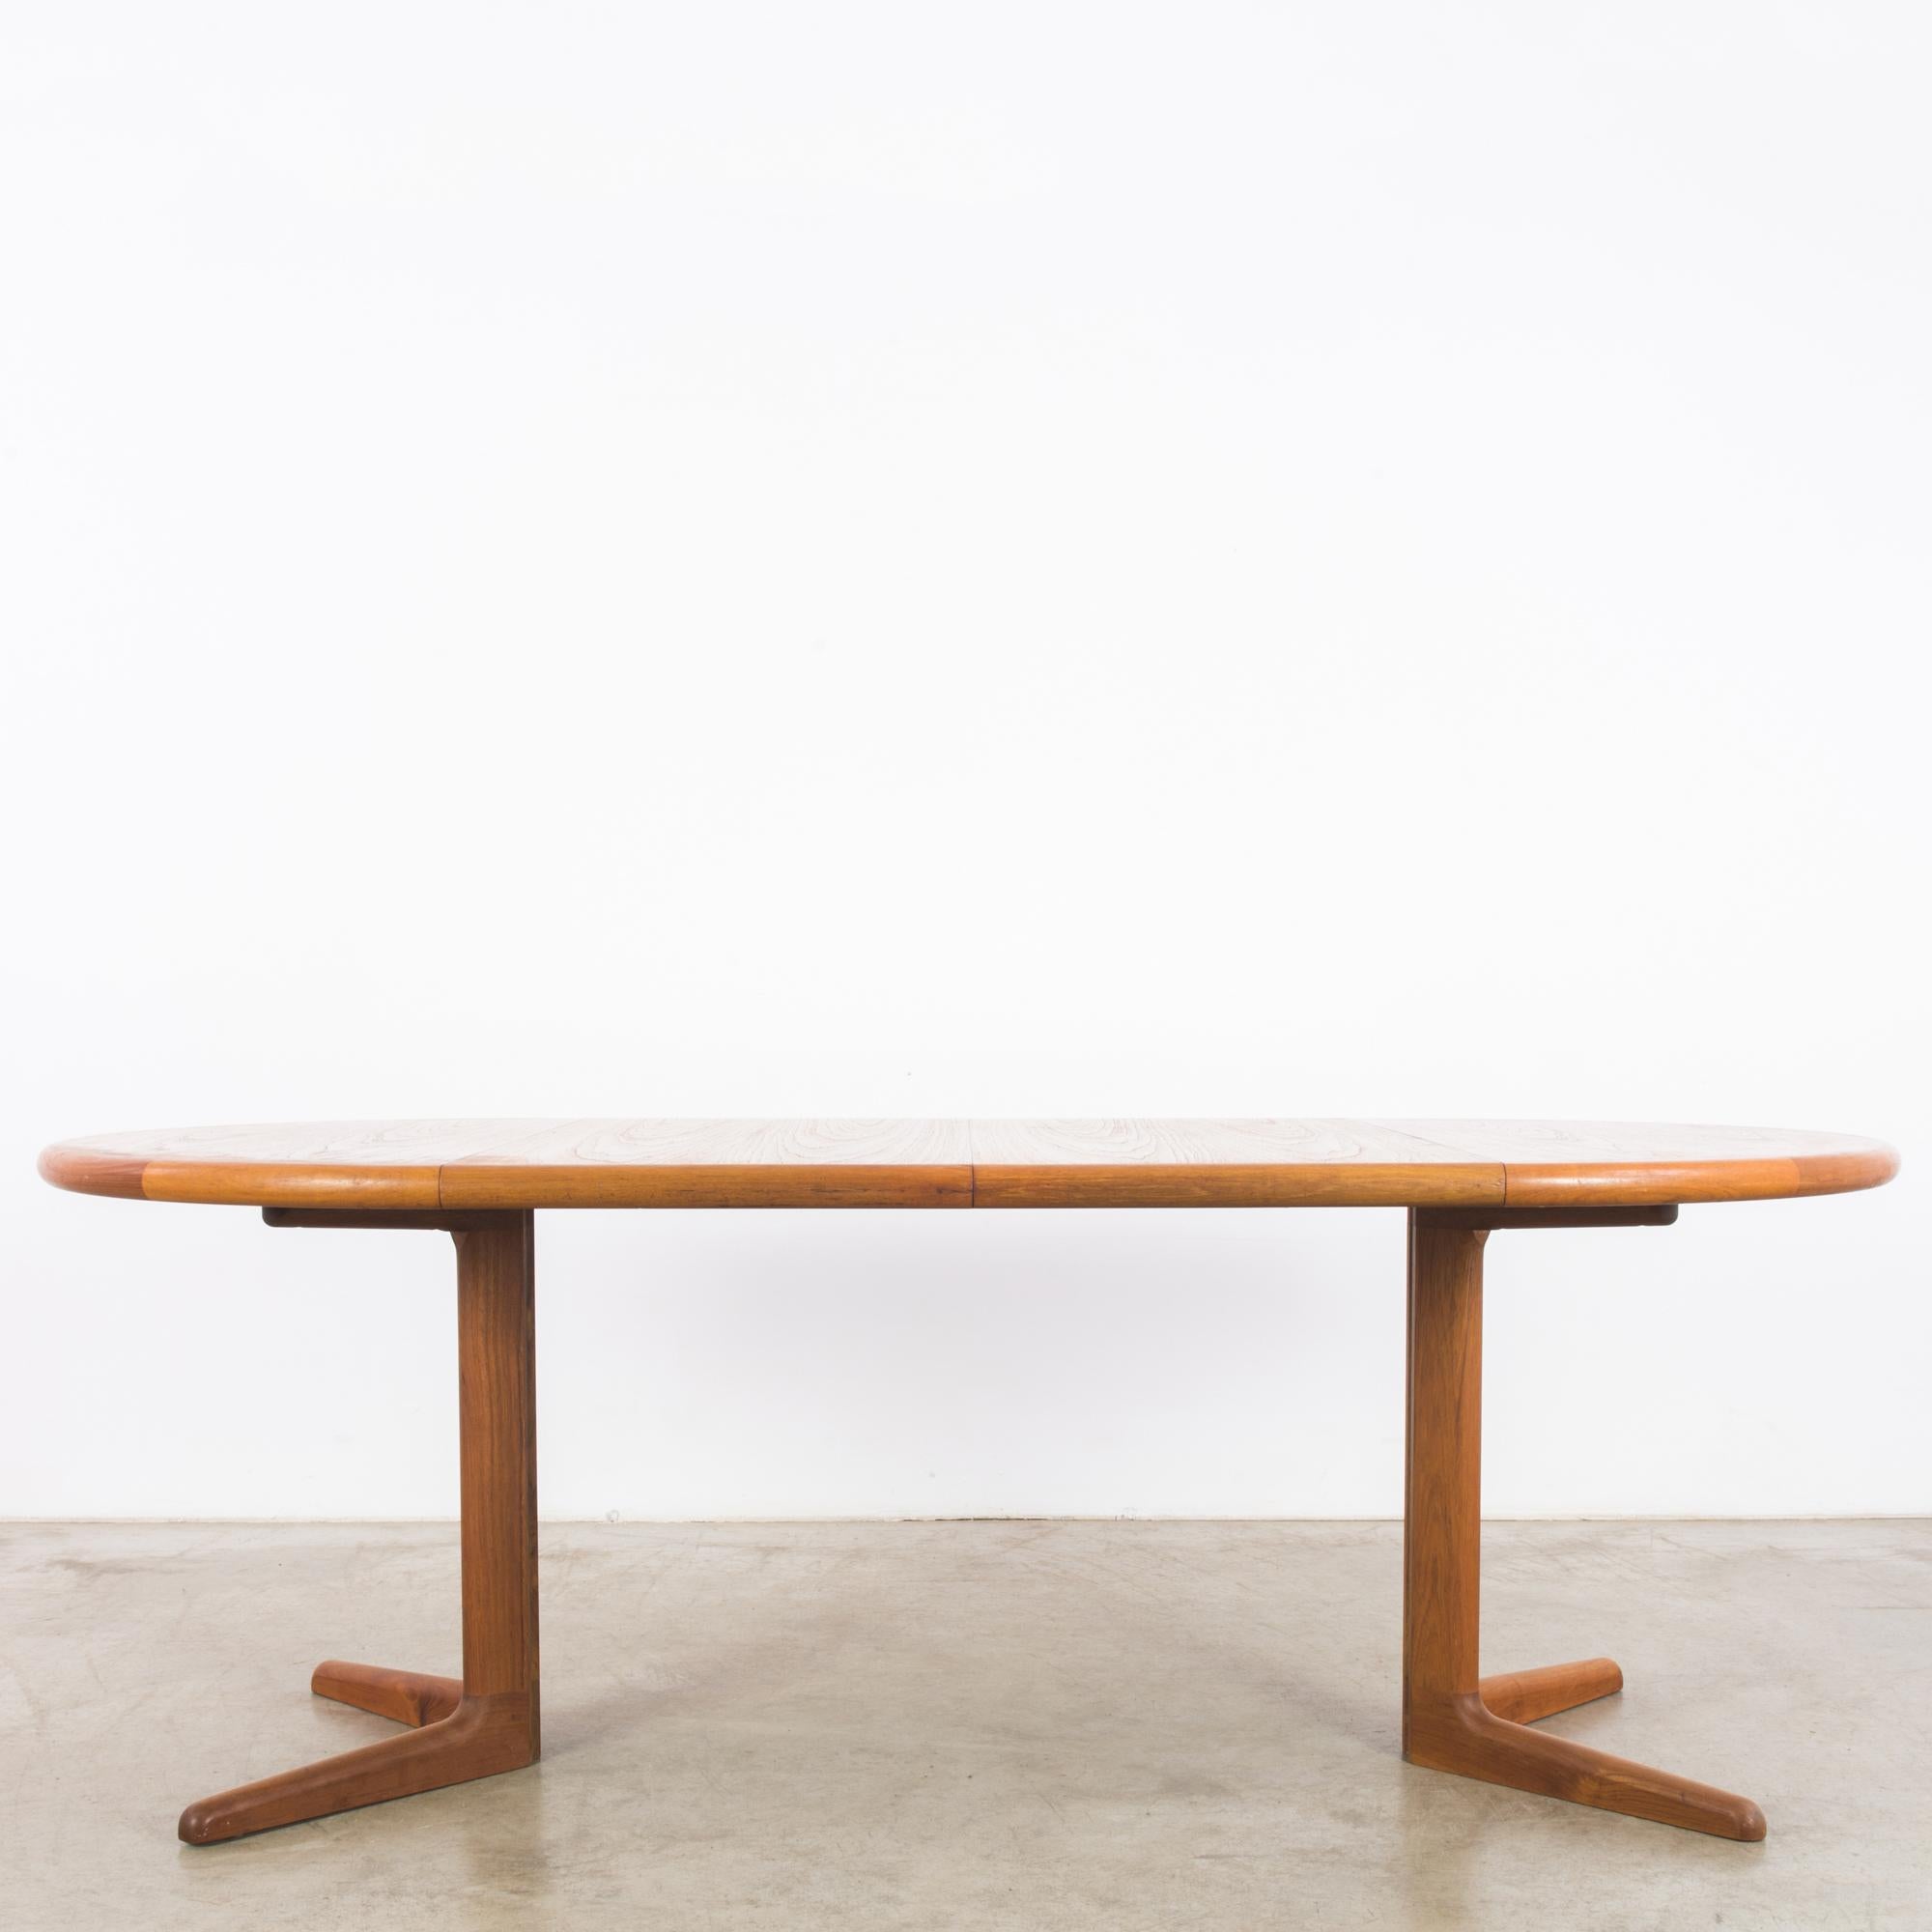 This teak dining table was made in Denmark, circa 1970. When fully extended, the table displays a stadium-shaped tabletop. It can be easily converted into a round table by removing two panels. This versatility and the use of high-quality teak